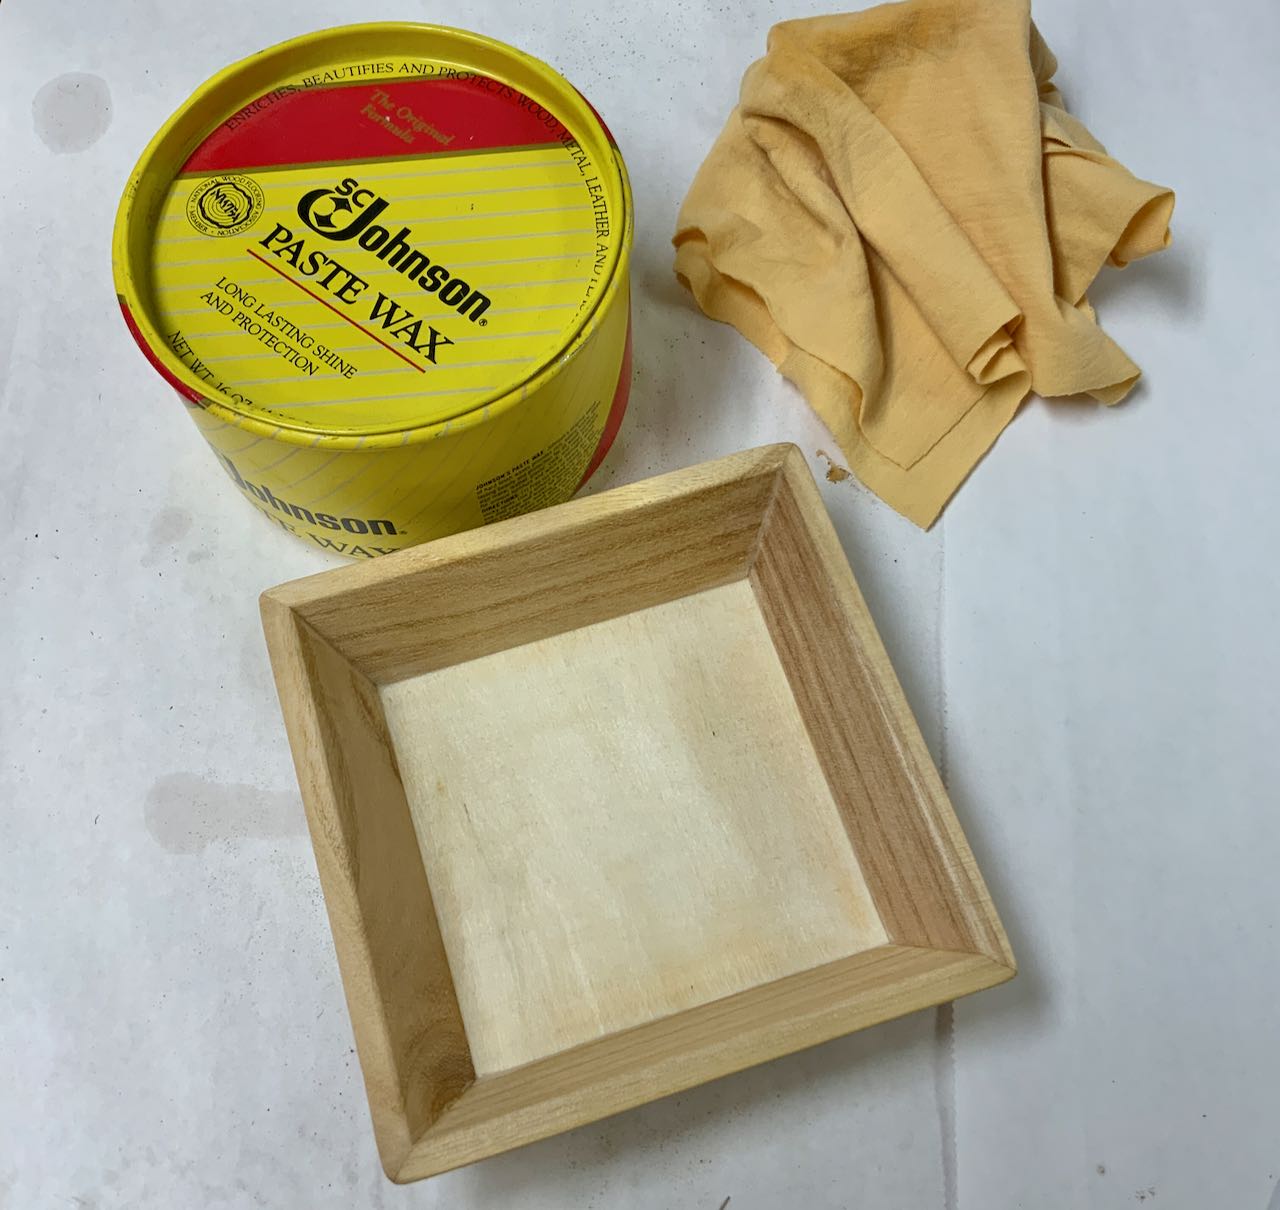 wood box with a sanded and waxed finish with can of wax and rag shown nearby